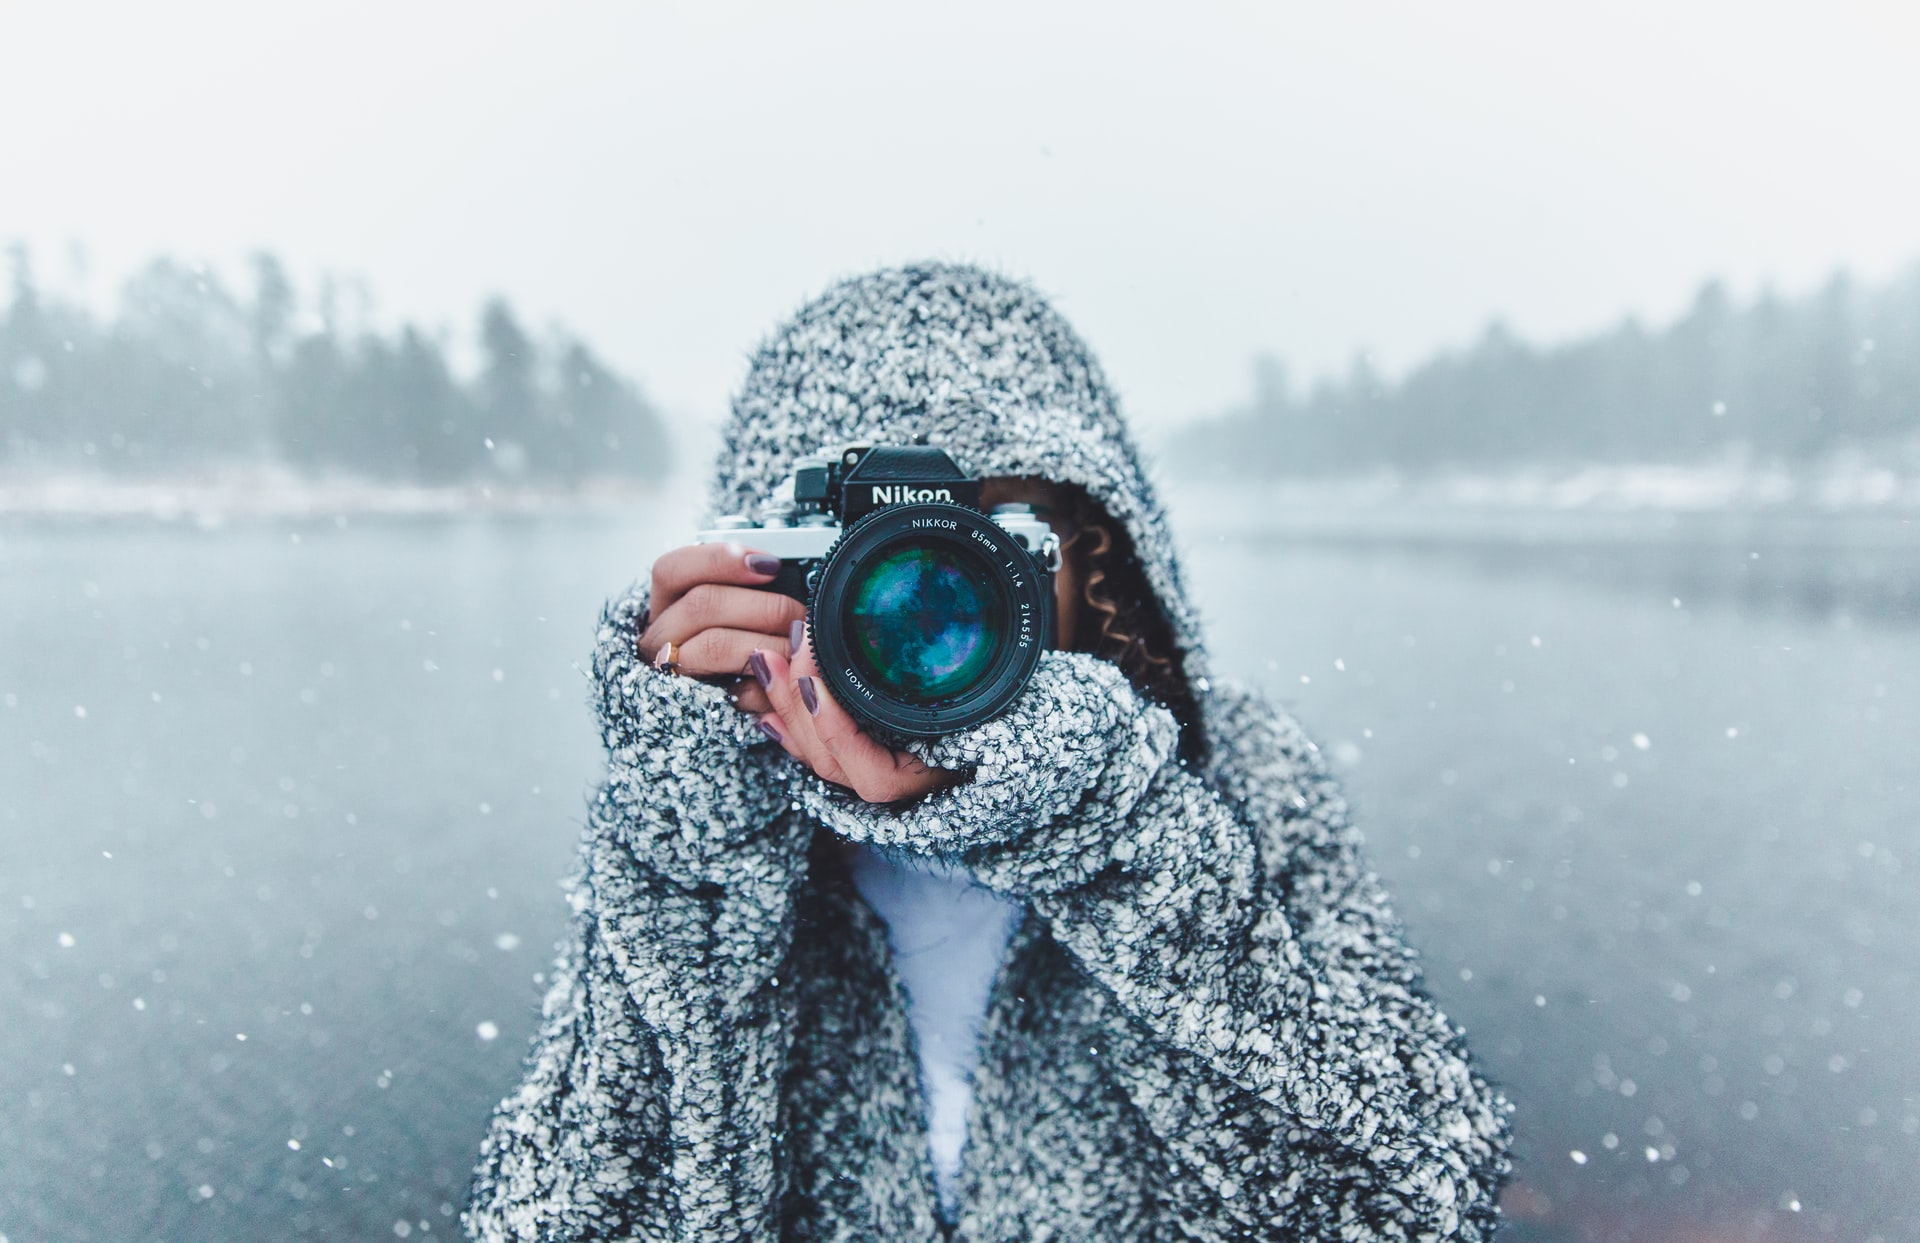 Photographer wrapped up warm and pointing camera at the viewer, standing in front of a lake surrounded by trees, snow falling all around